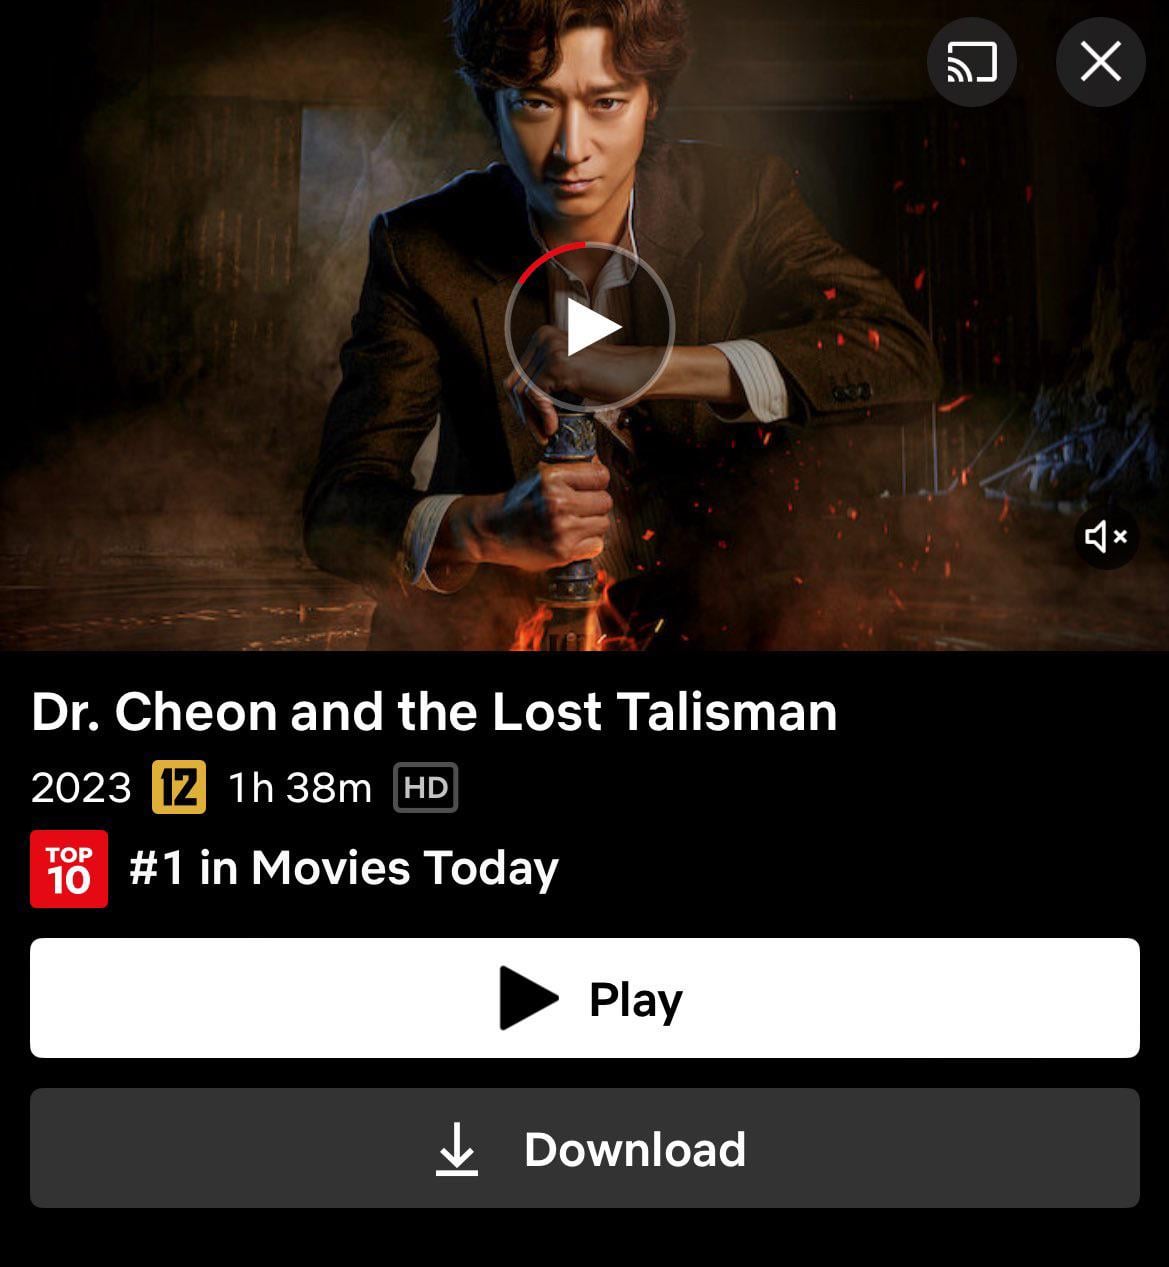 240123 Jisoo - ‘Dr. Cheon and the Lost Talisman’ movie is now available in Netflix Korea